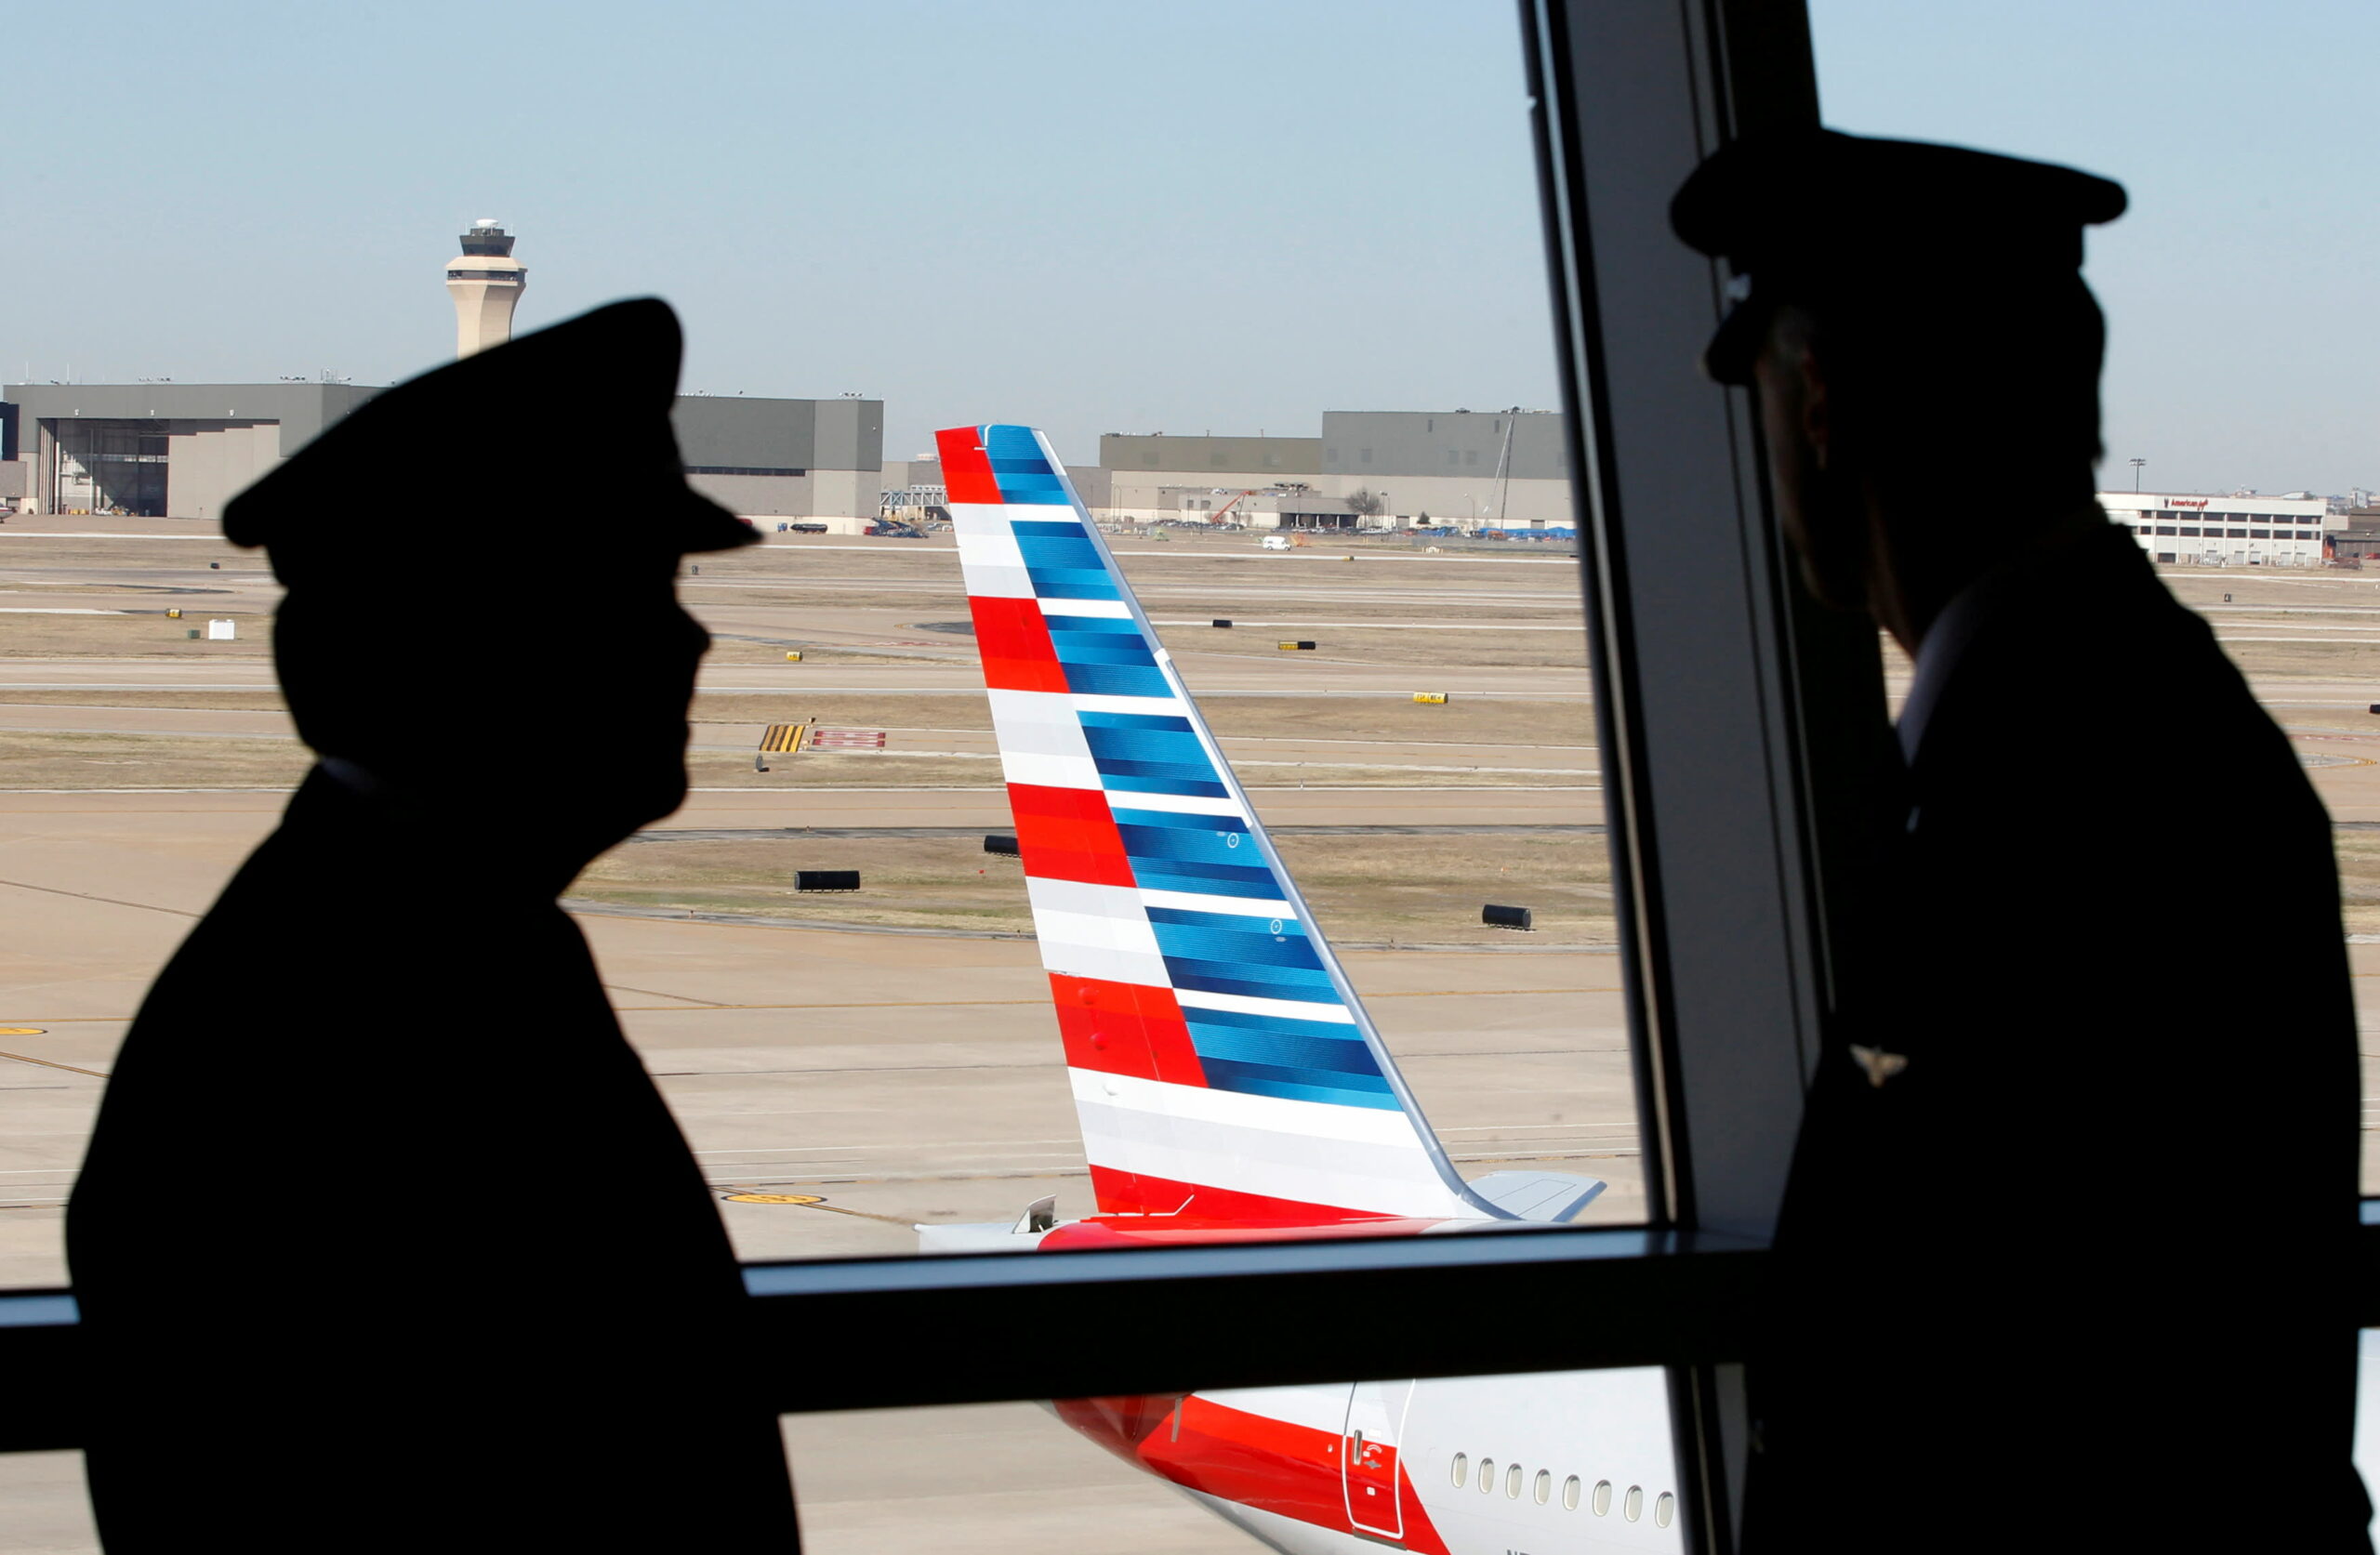 American Airlines pilots want managers replaced over flight disruptions